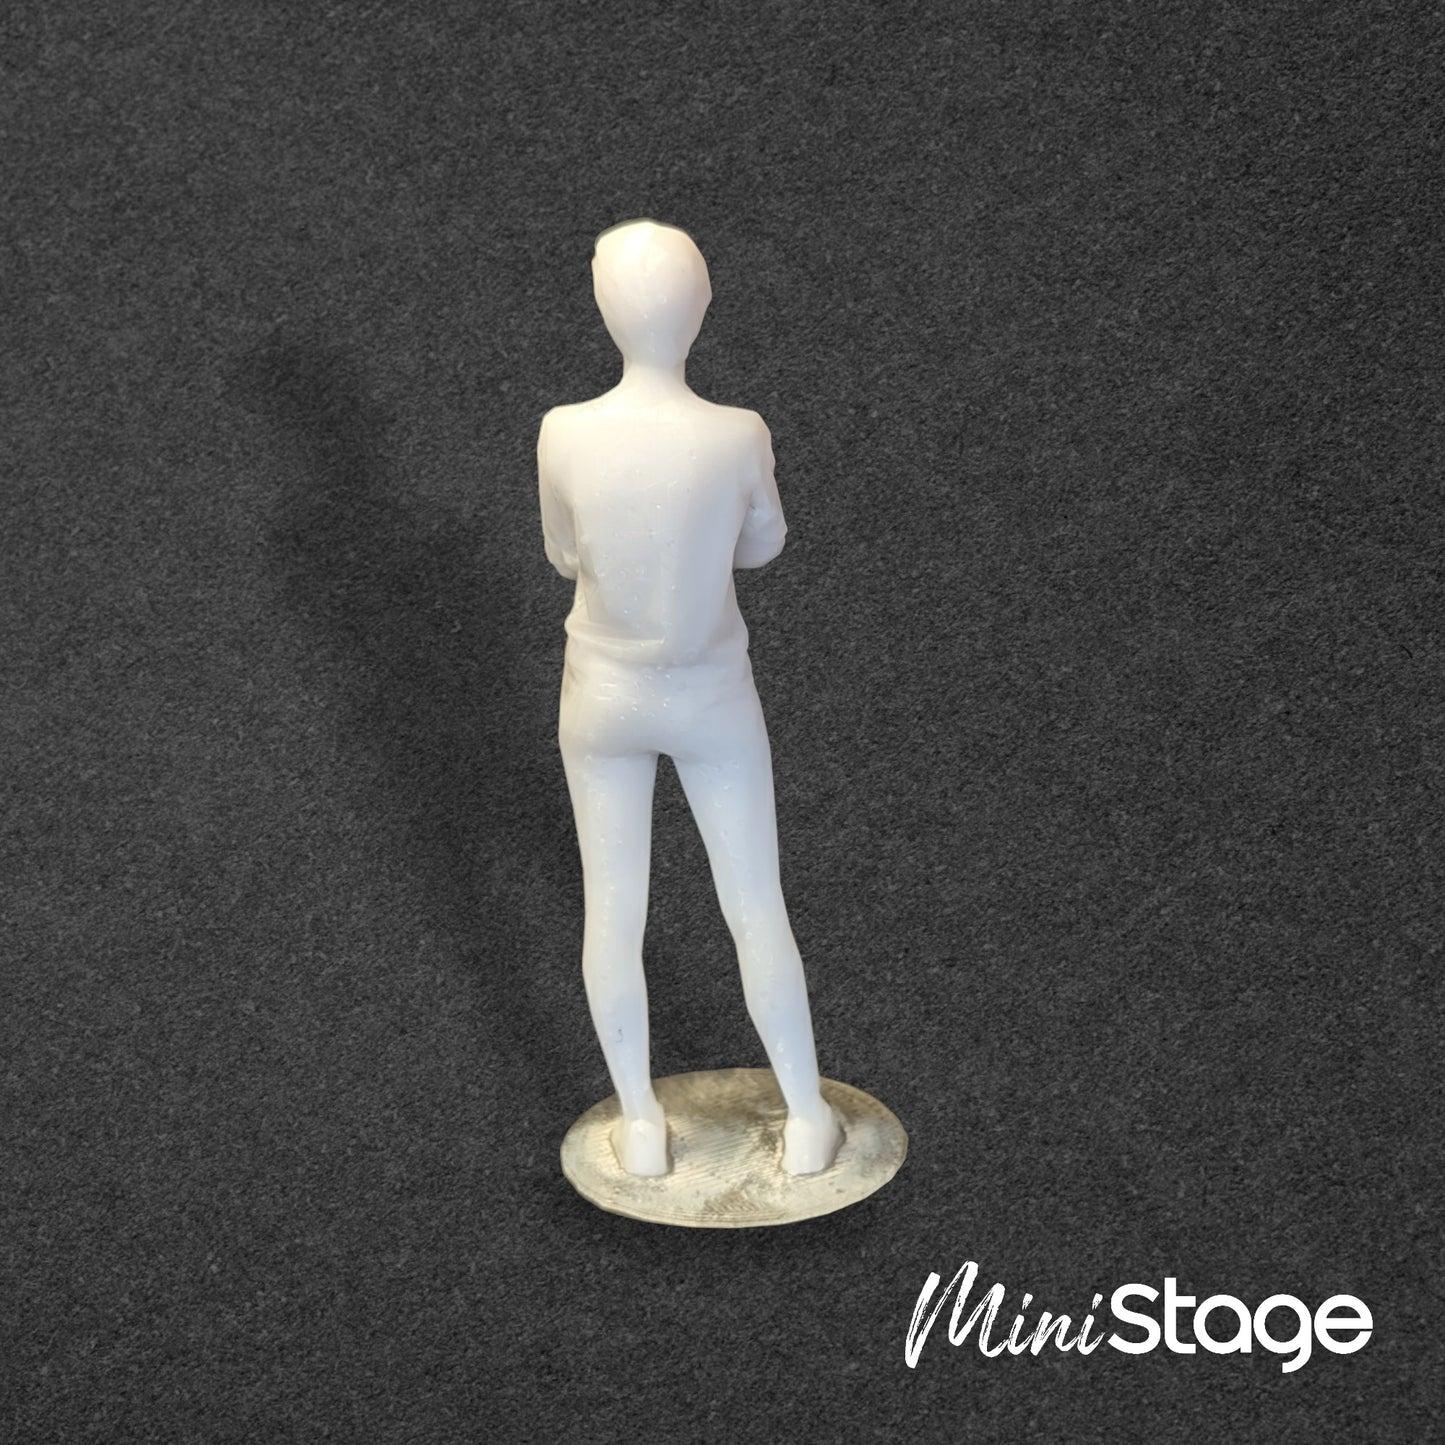 Lily - Scale Modelbox Unpainted Figure of Woman Standing with Arms Folded